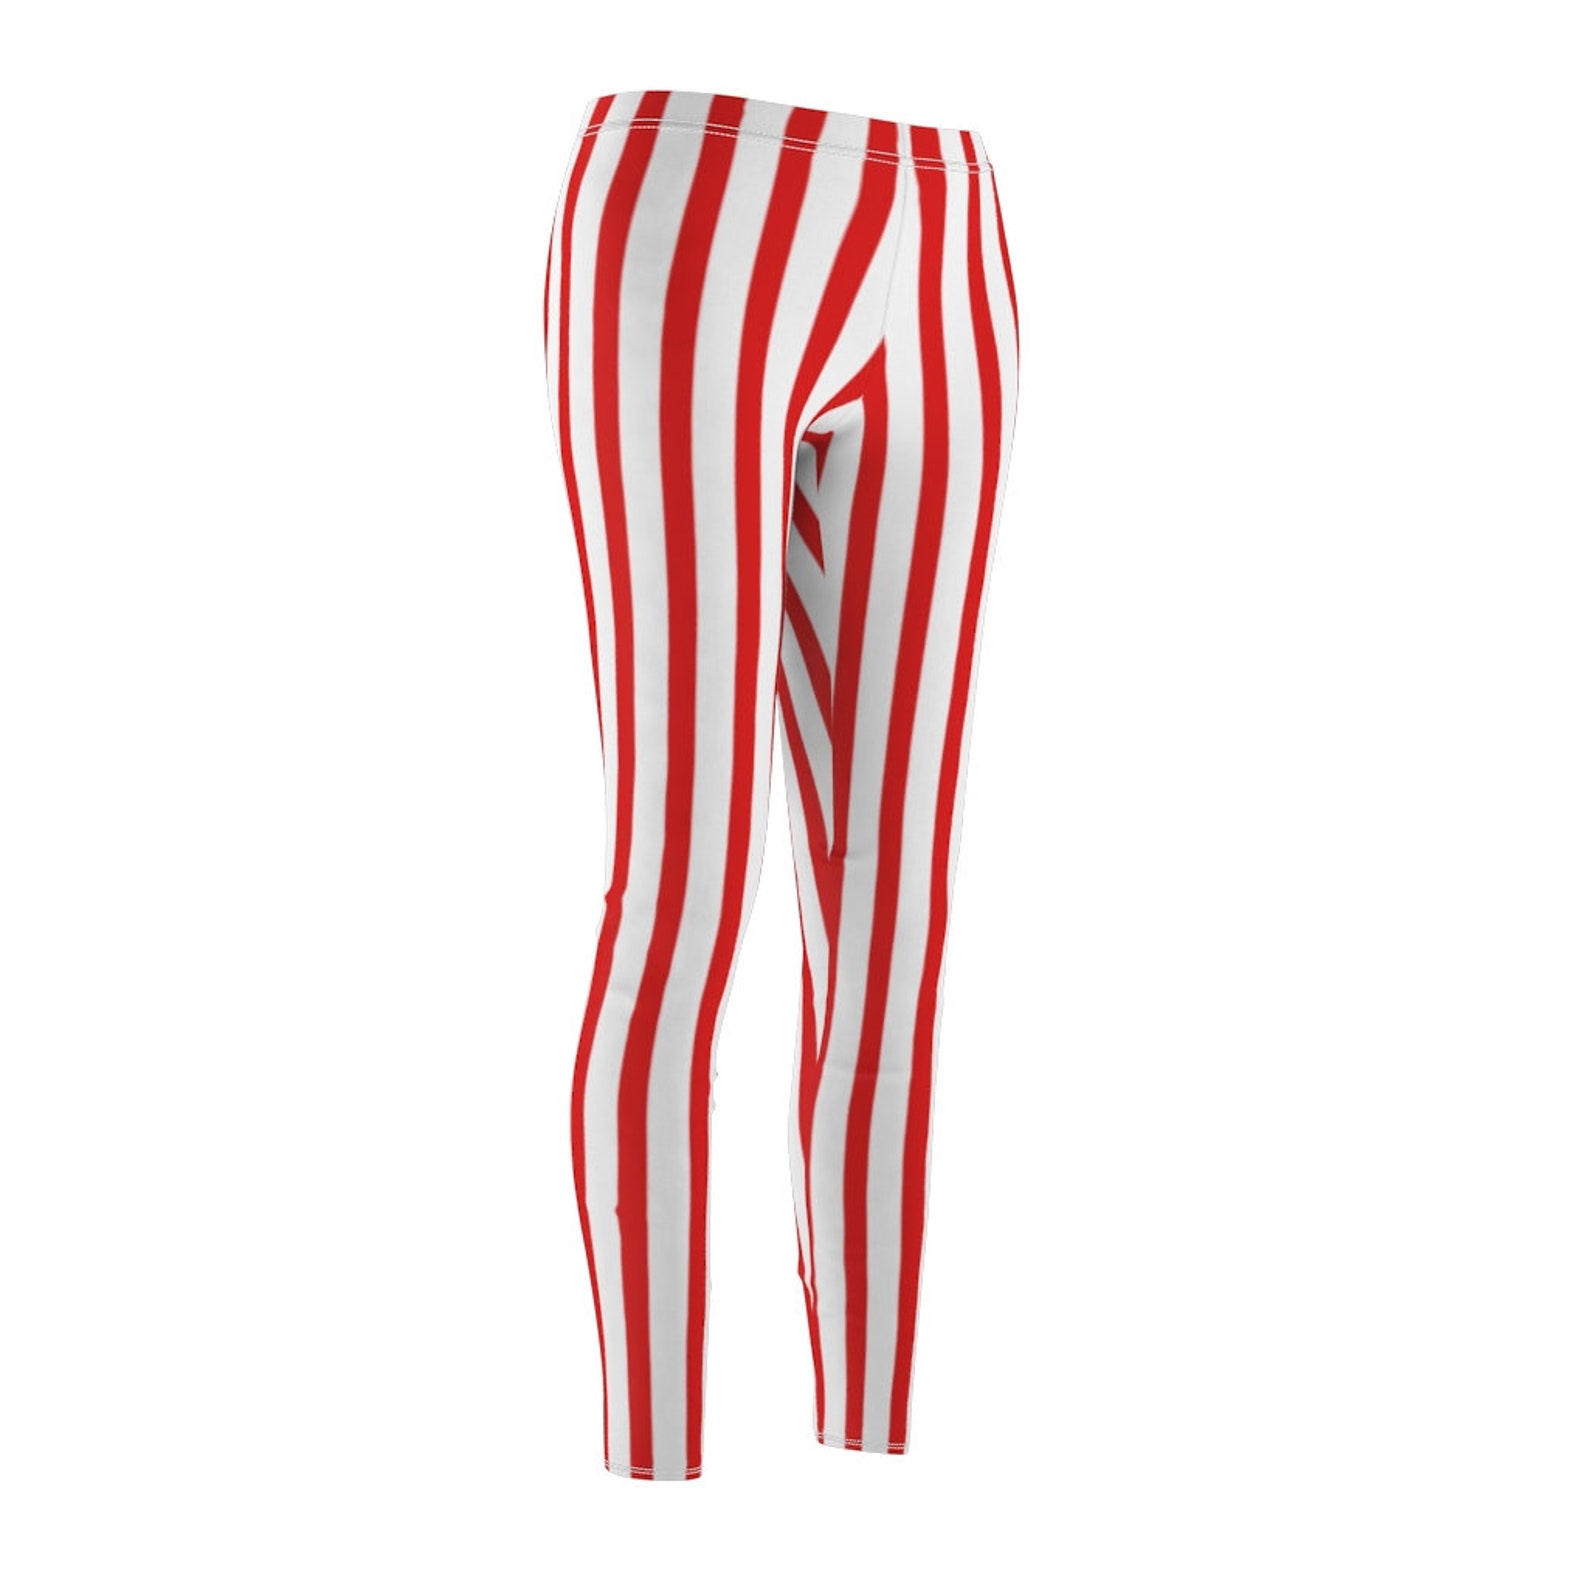 Circus Leggings Red and White Vertical Striped Leggings - Etsy